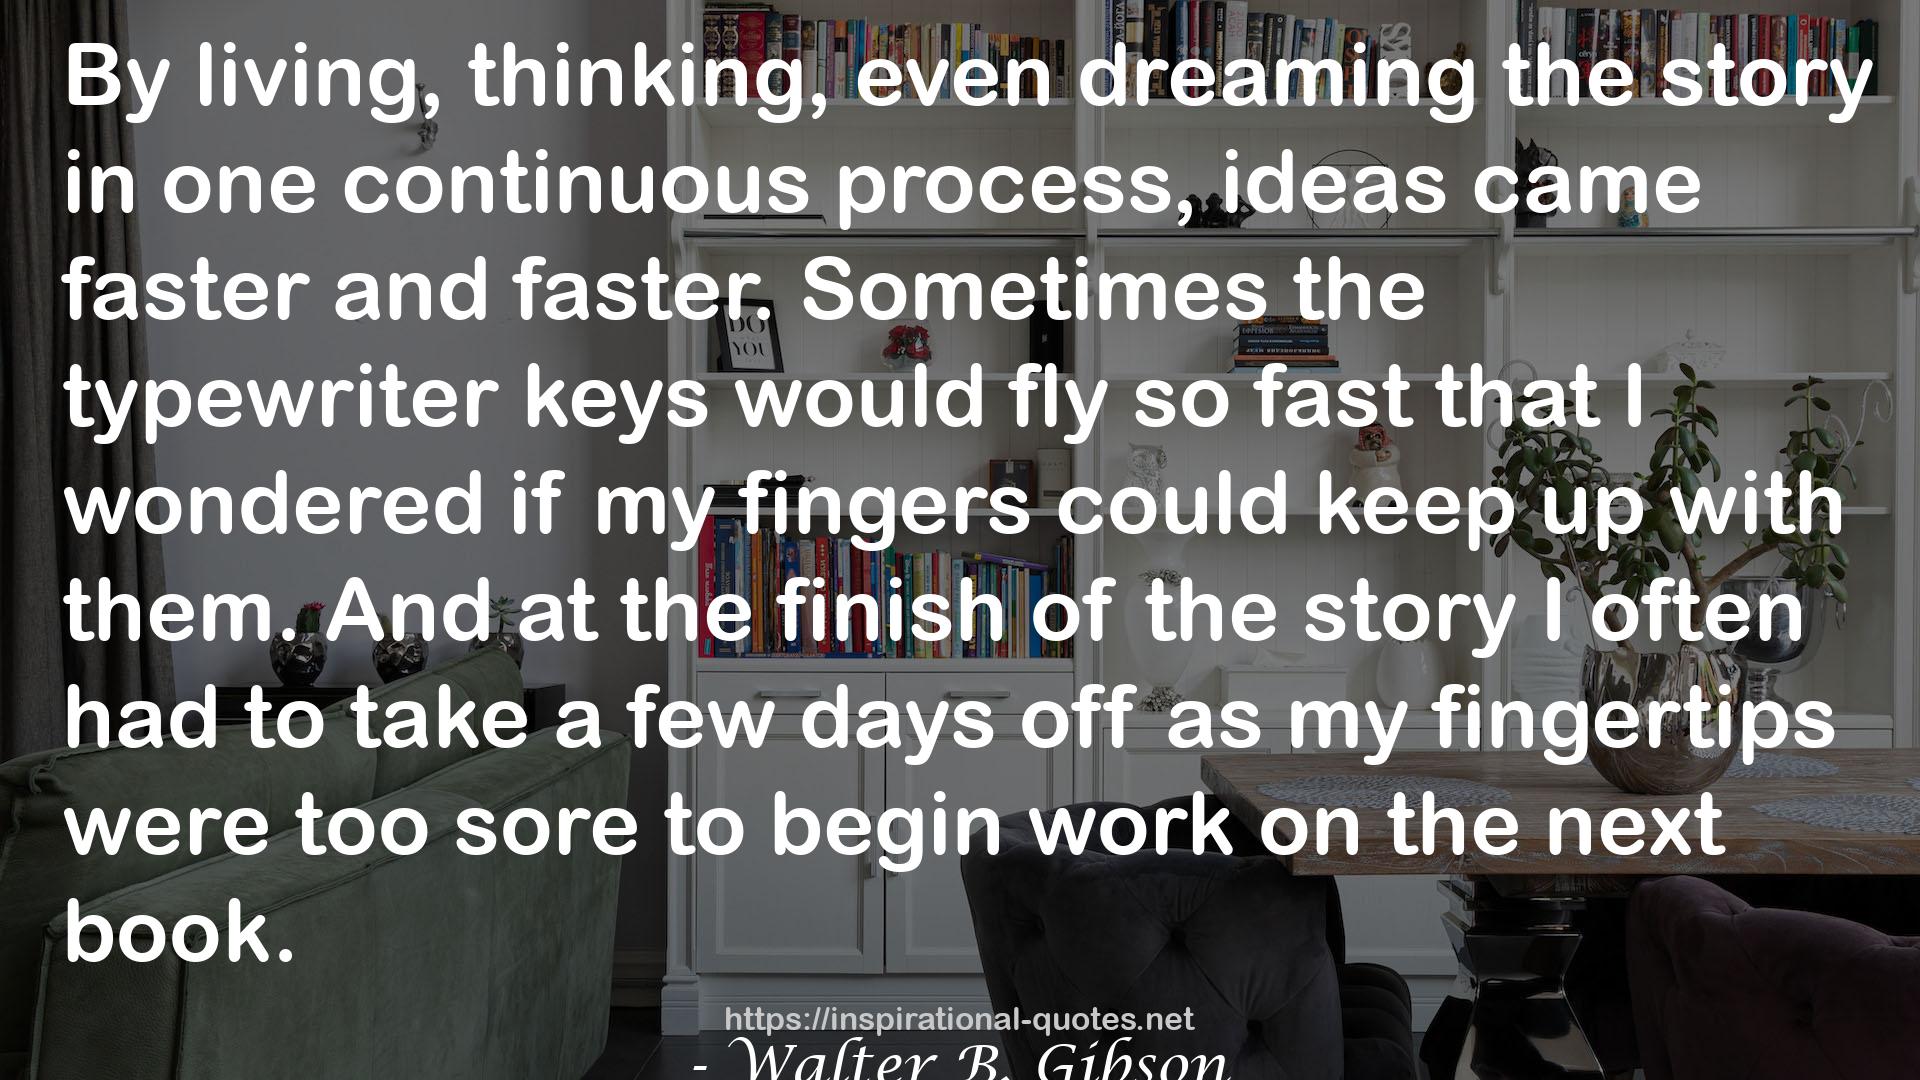 Walter B. Gibson QUOTES